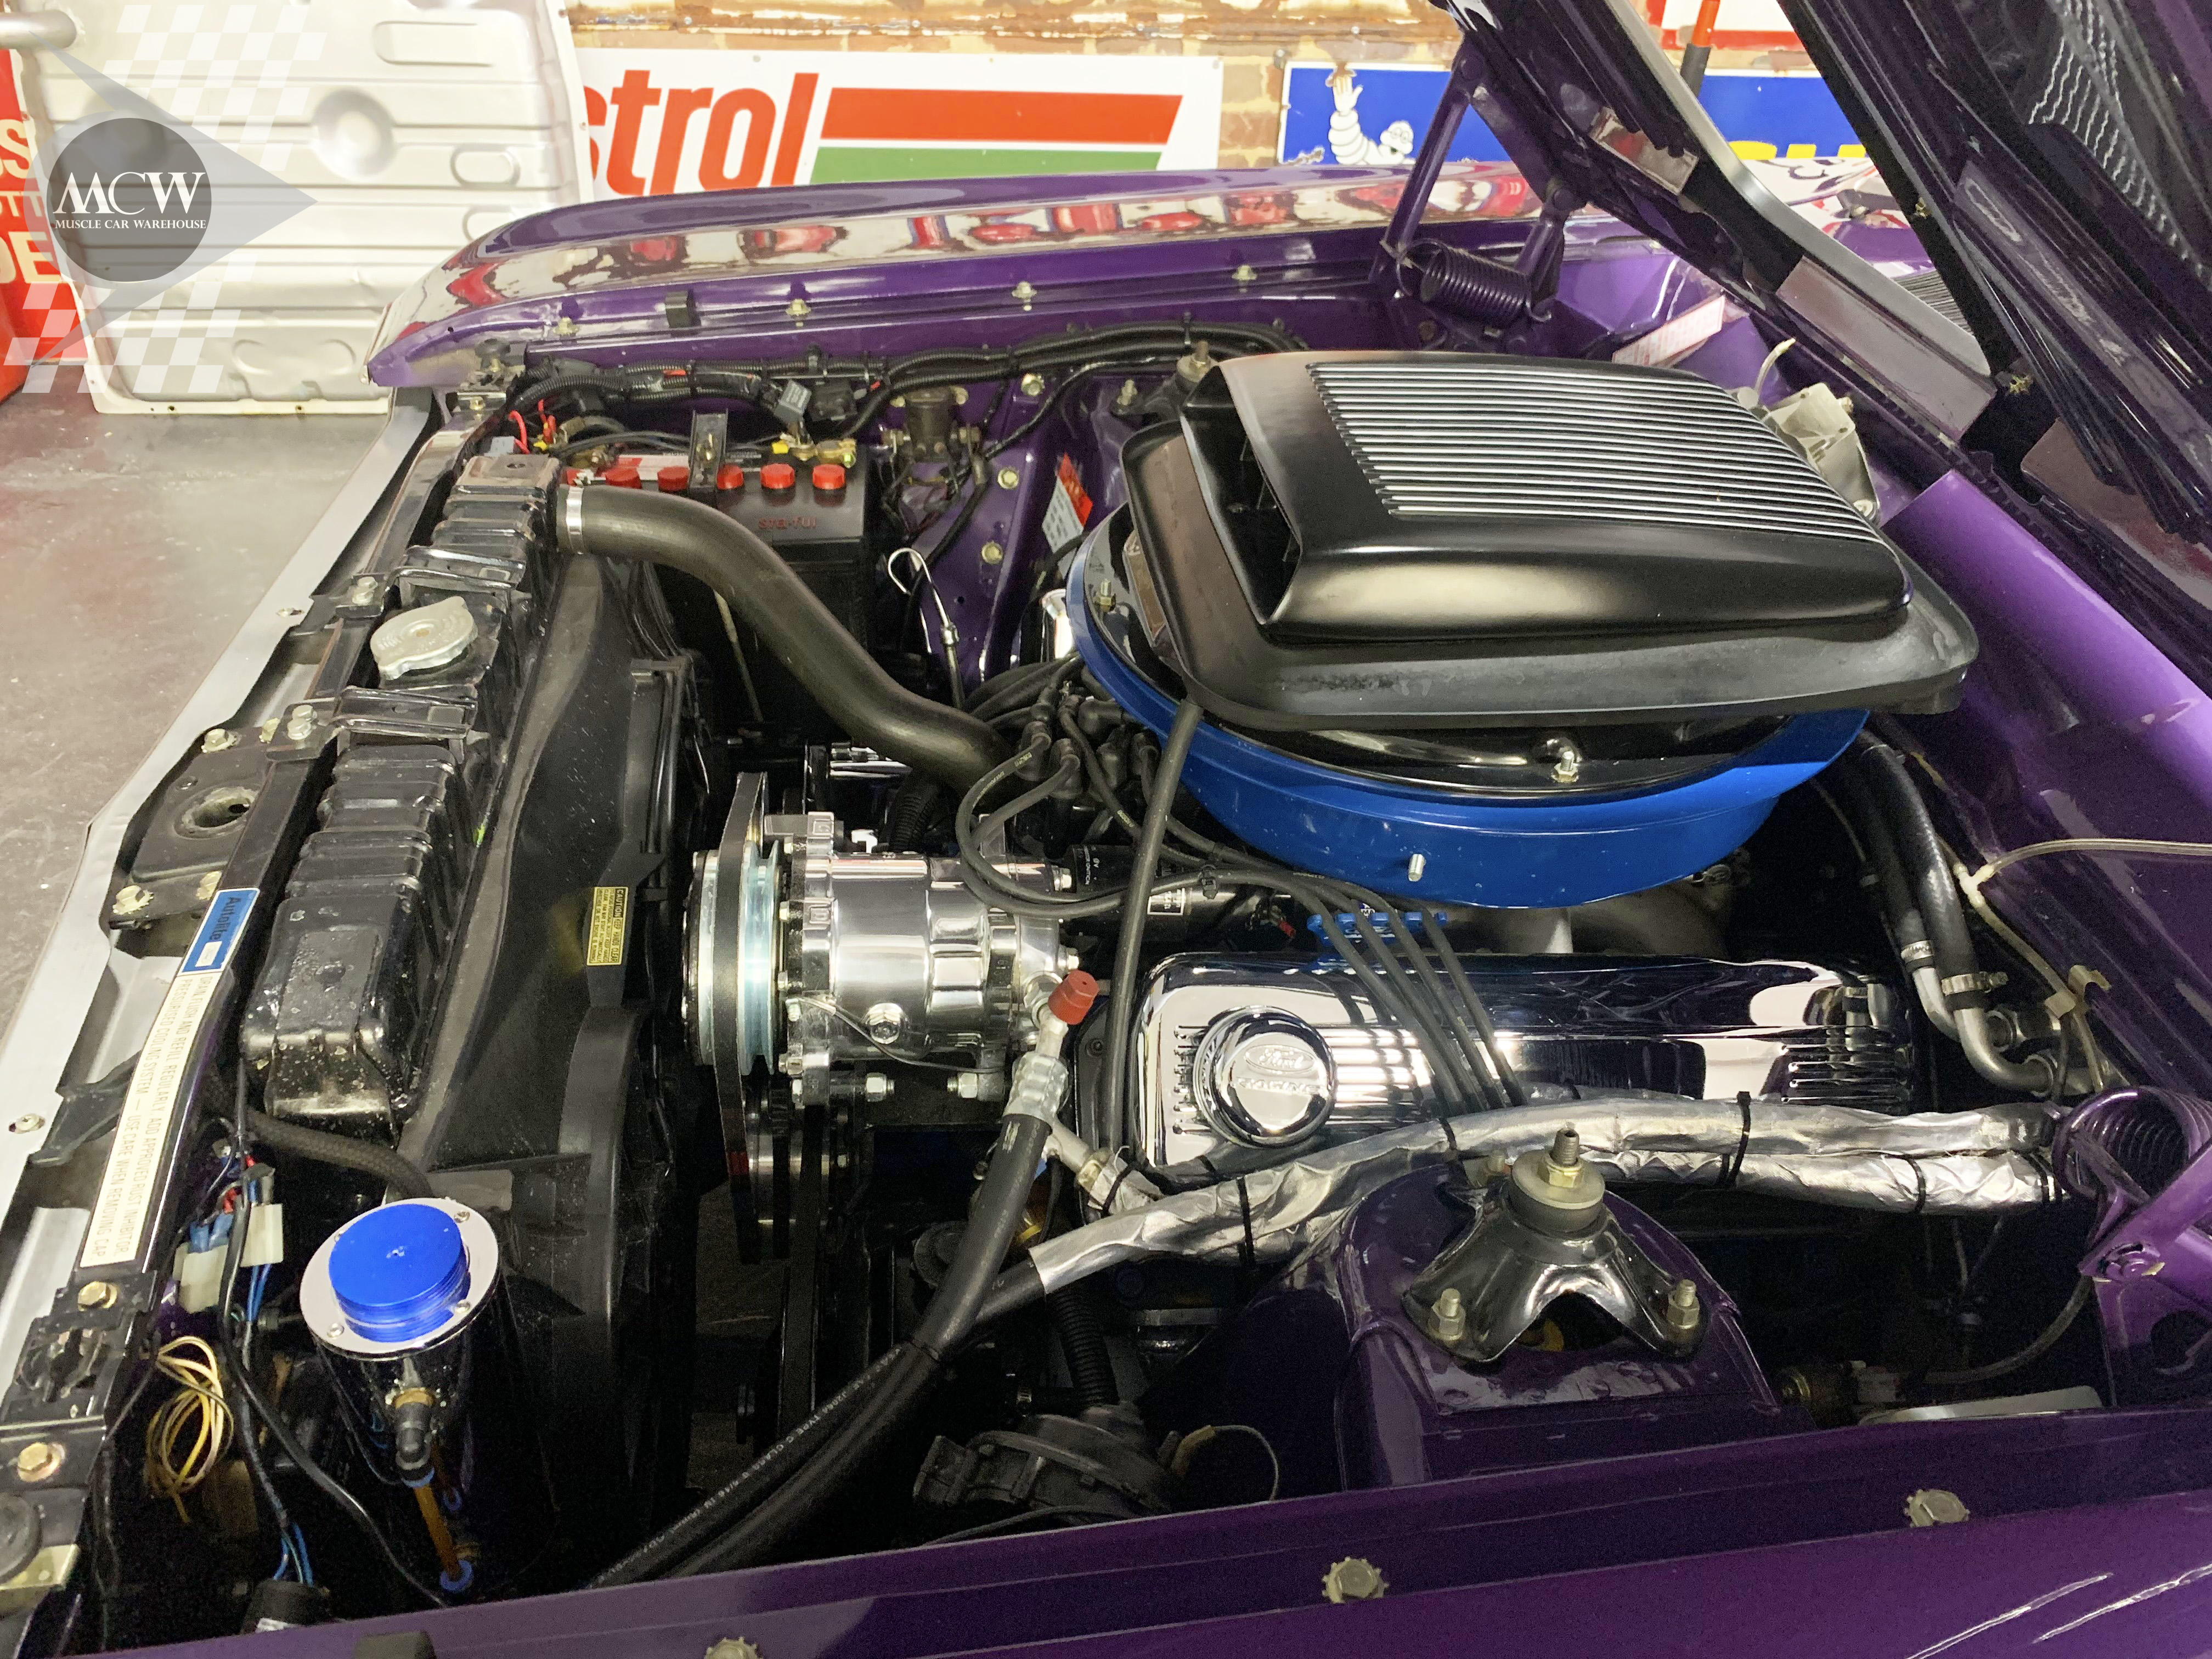 1971 Ford Falcon XY GTHO Replica Engine | Muscle Car Warehouse